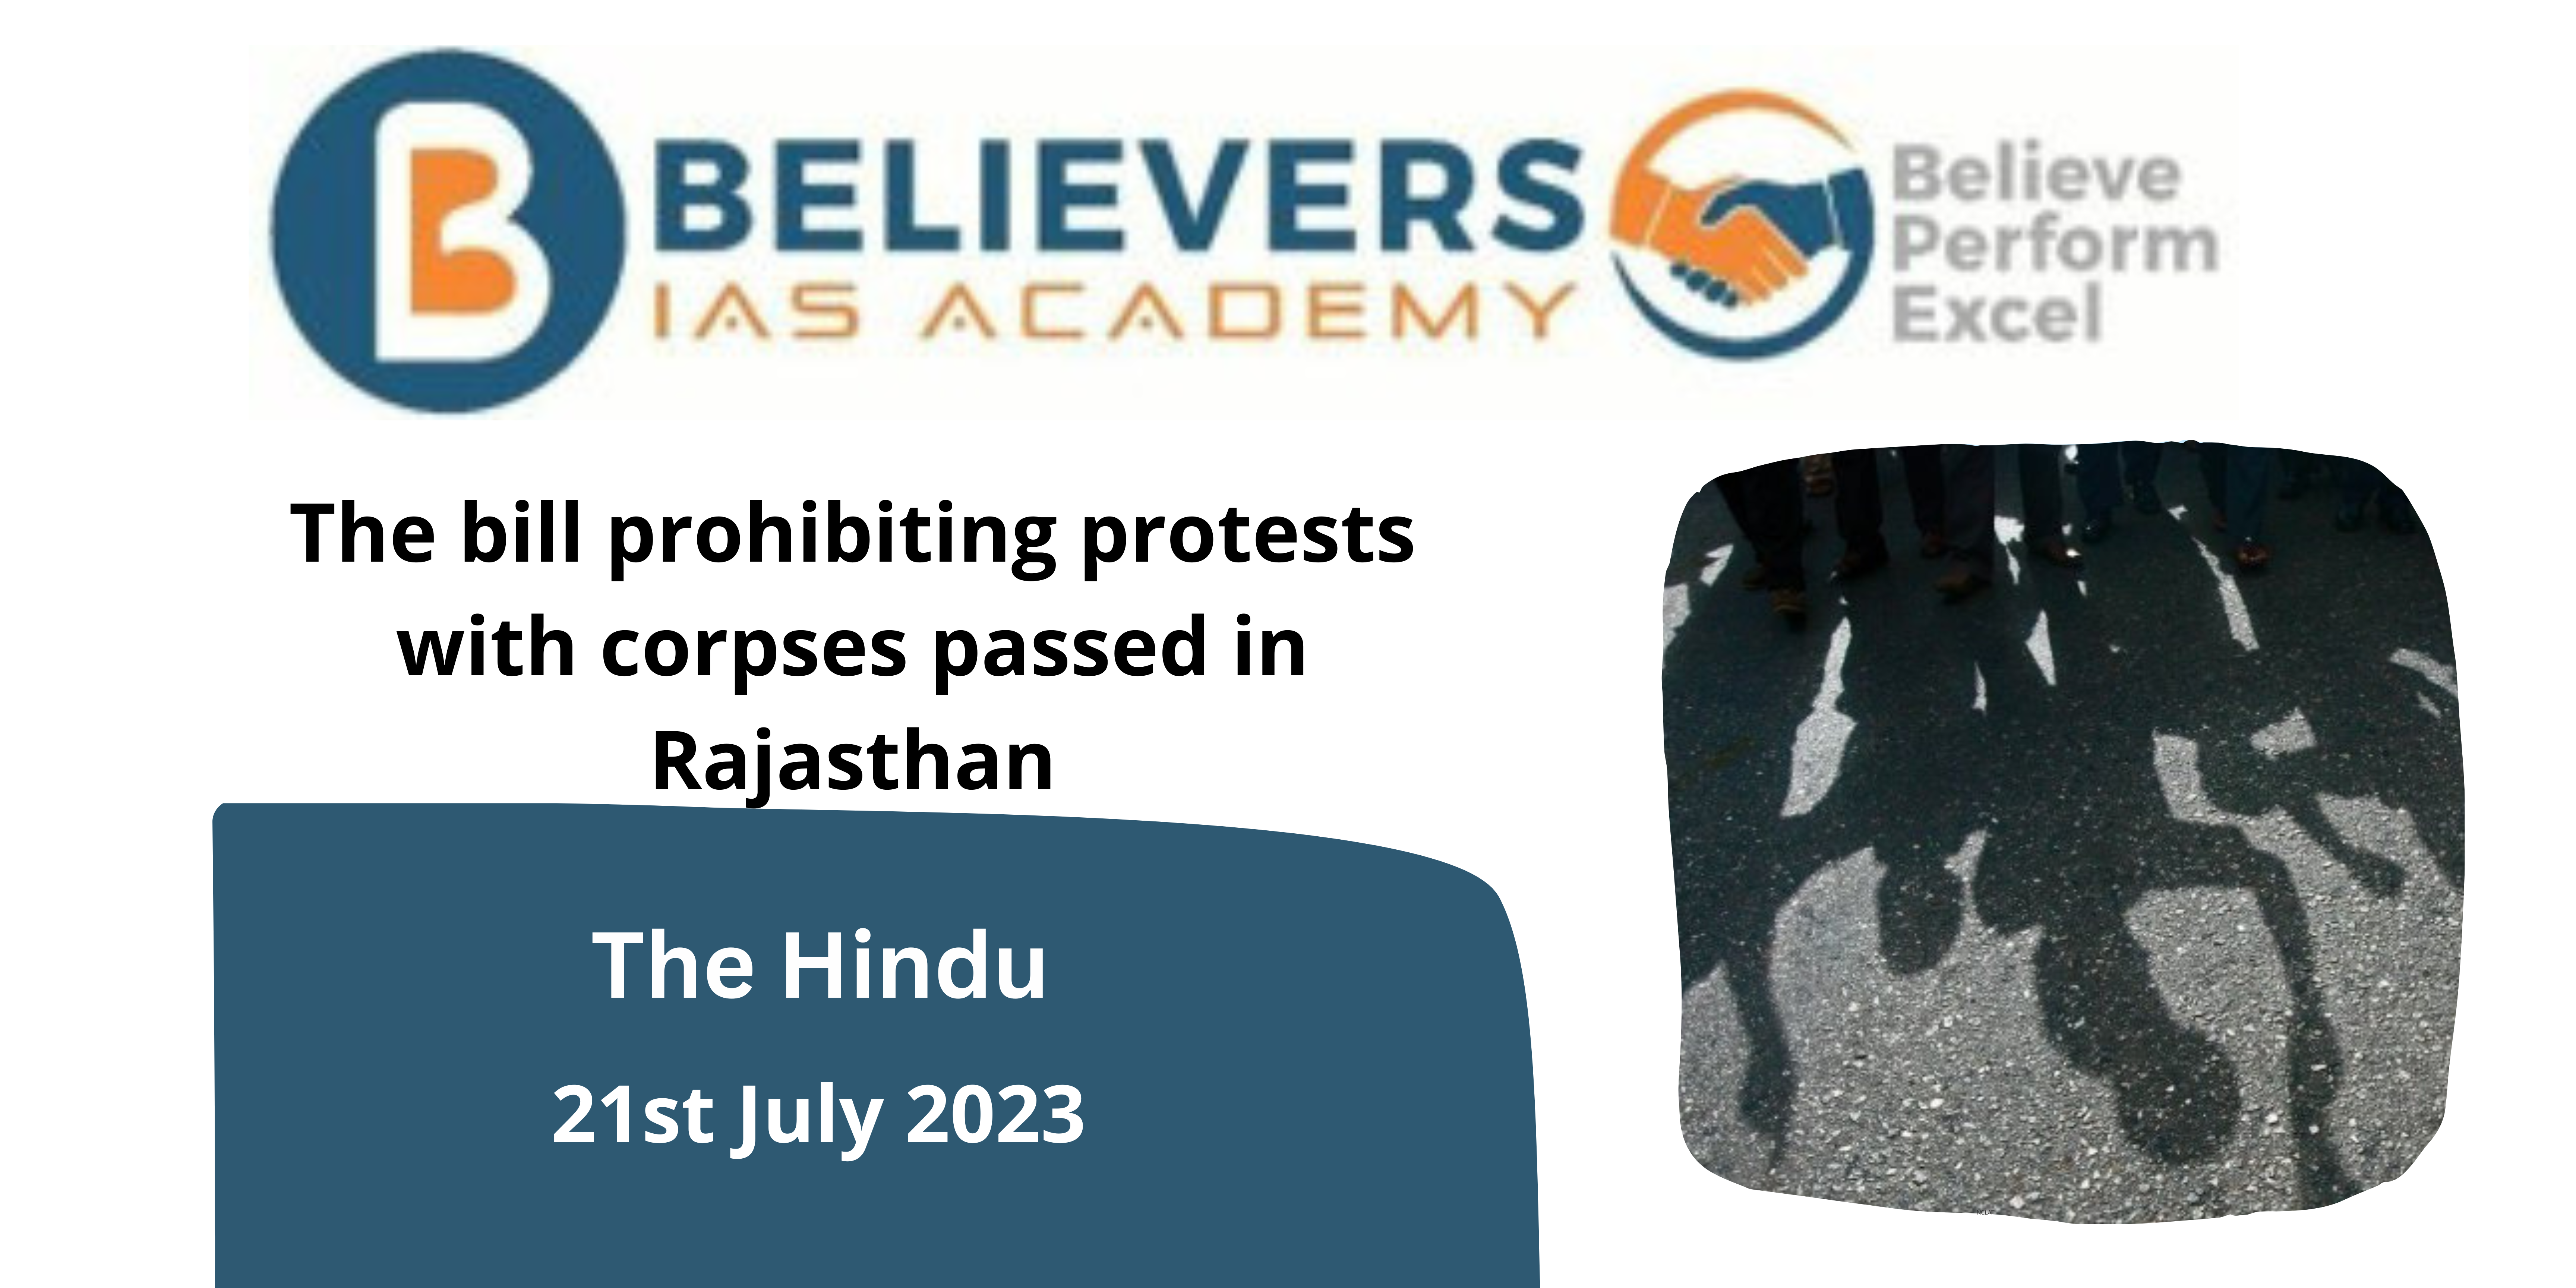 The bill prohibiting protests with corpses passed in Rajasthan